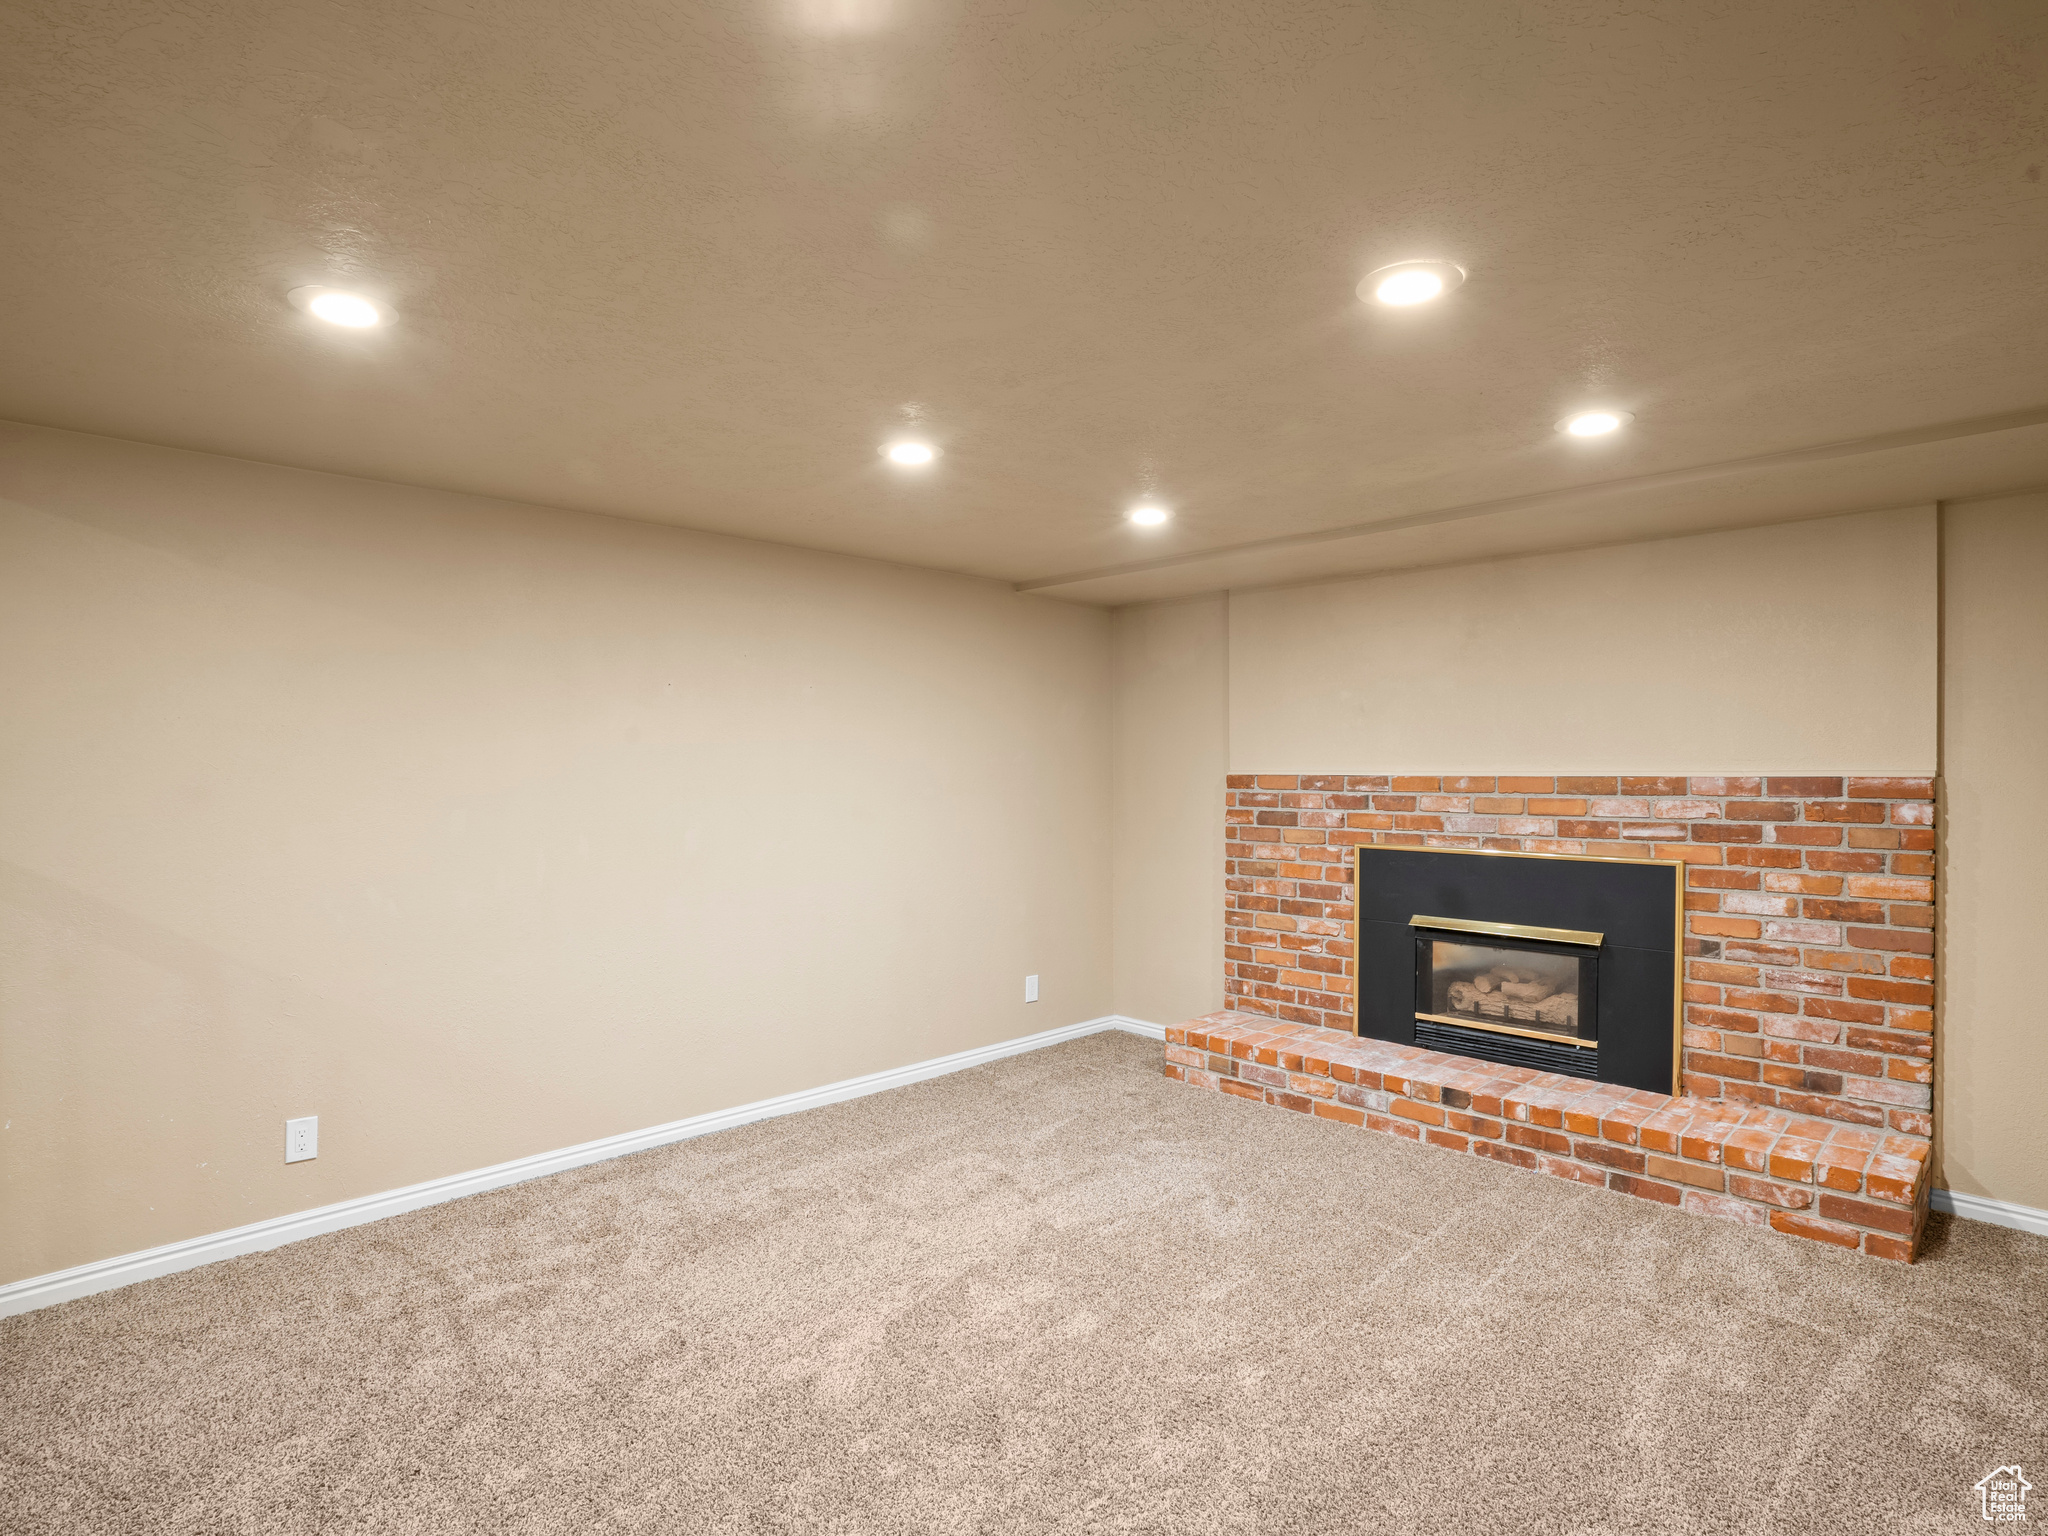 Unfurnished living room with a fireplace and carpet floors